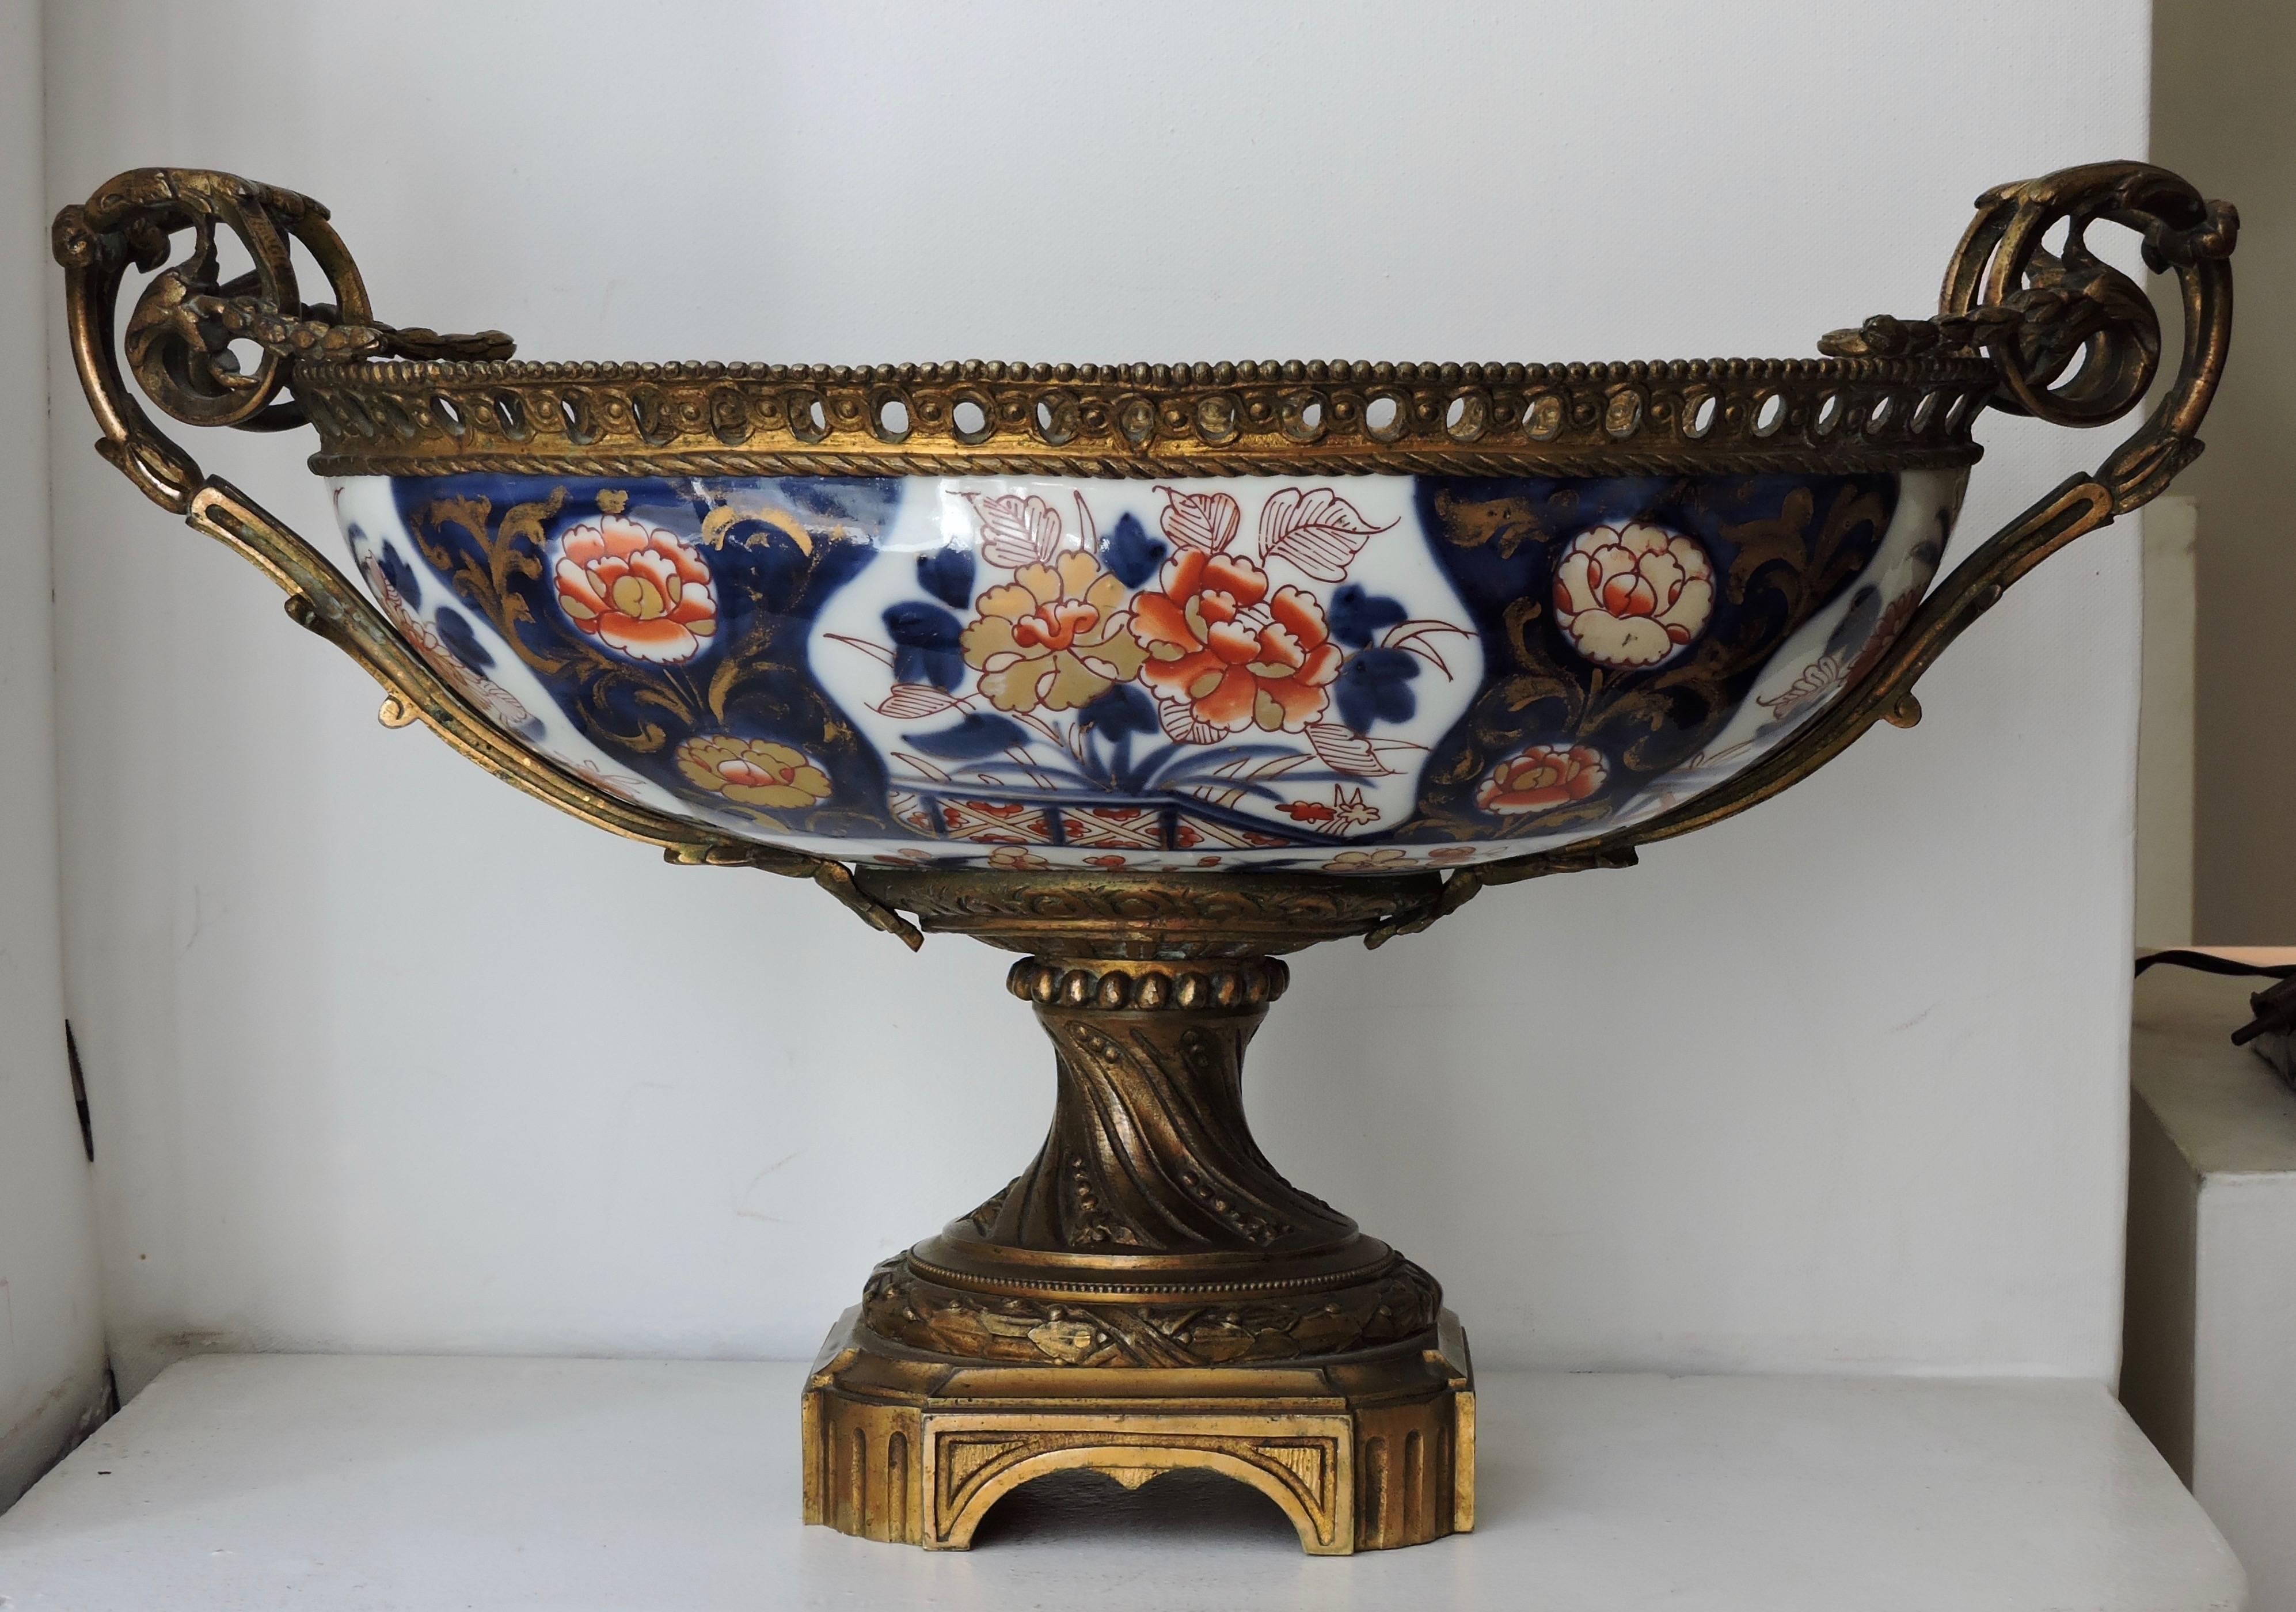 An oval shaped Bayeux porcelain in Imari style centrepiece
Mounted in Louis XVI style gilt and chiseled bronze.